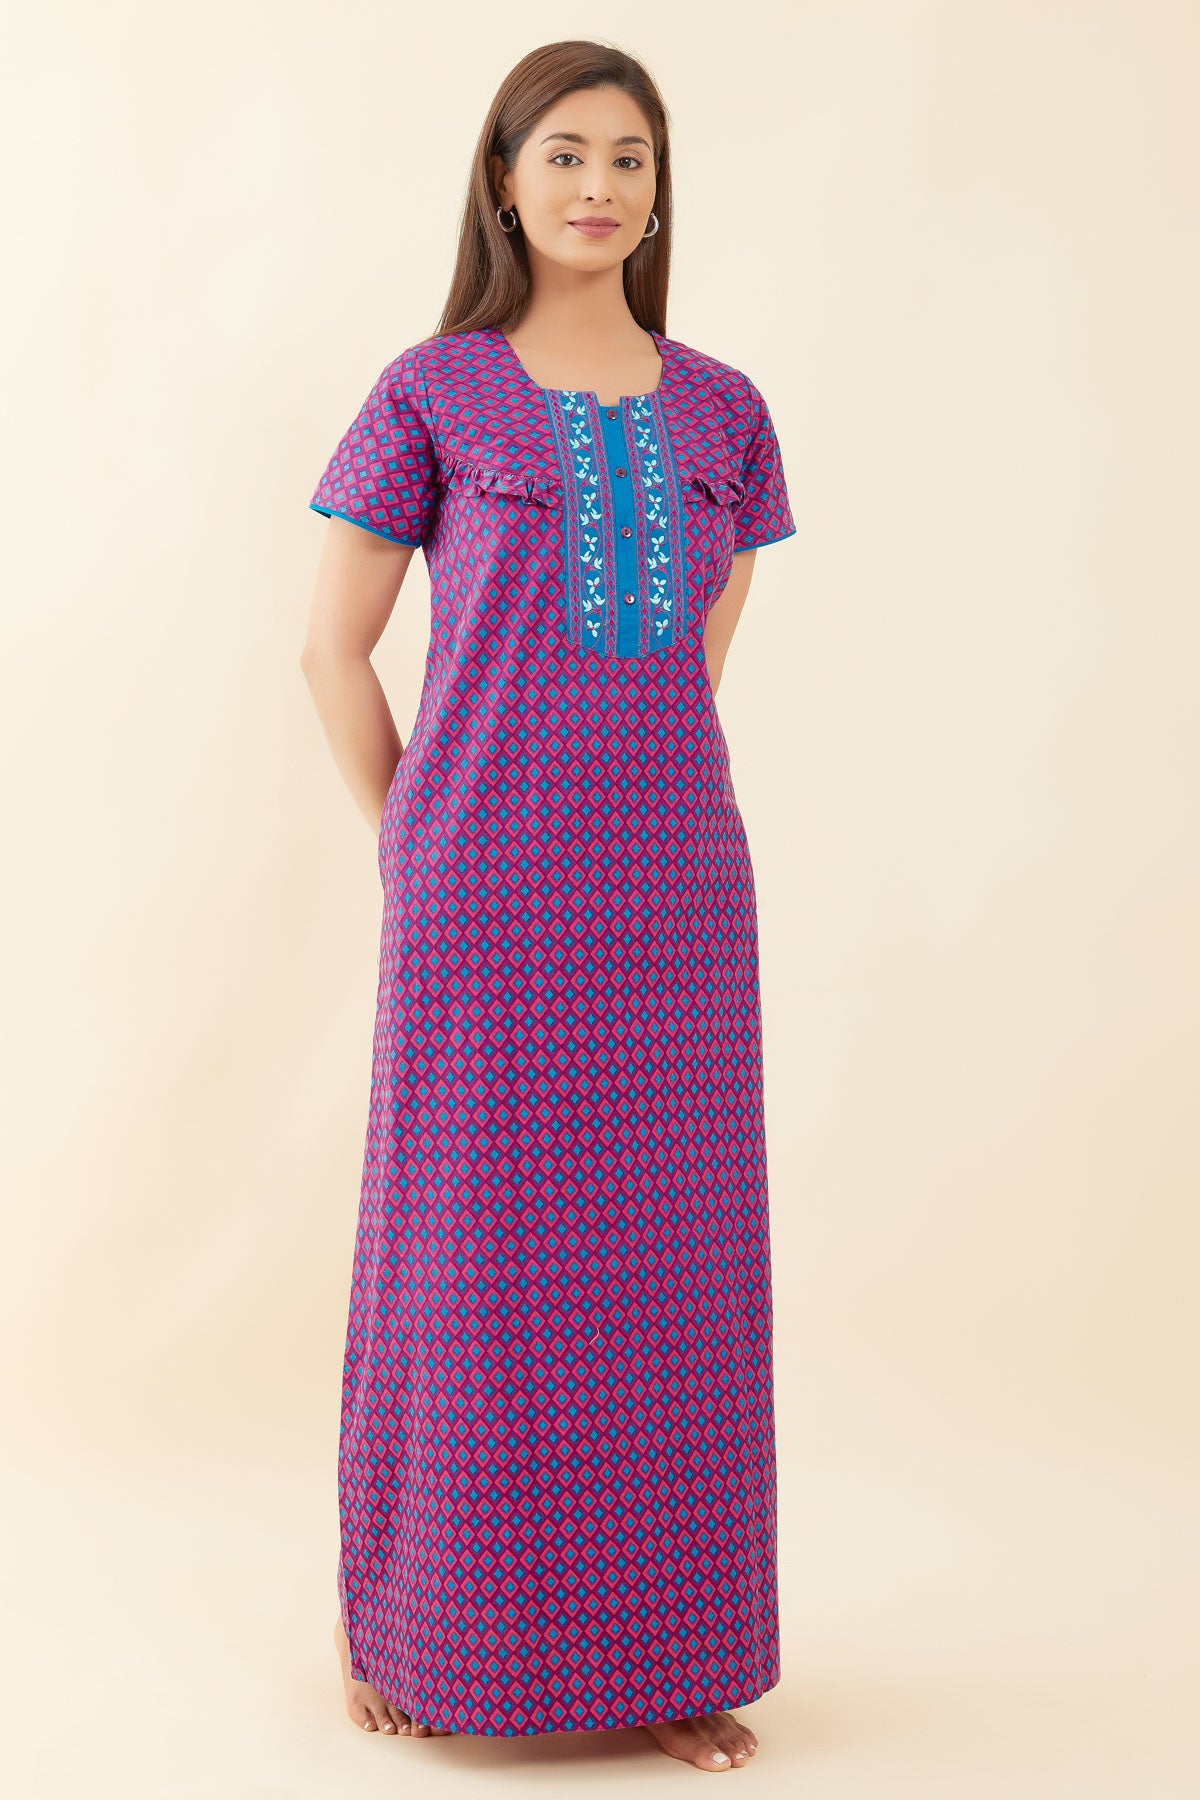 All Over Geometric Printed With Pleat Embellished Yoke Nighty - Pink